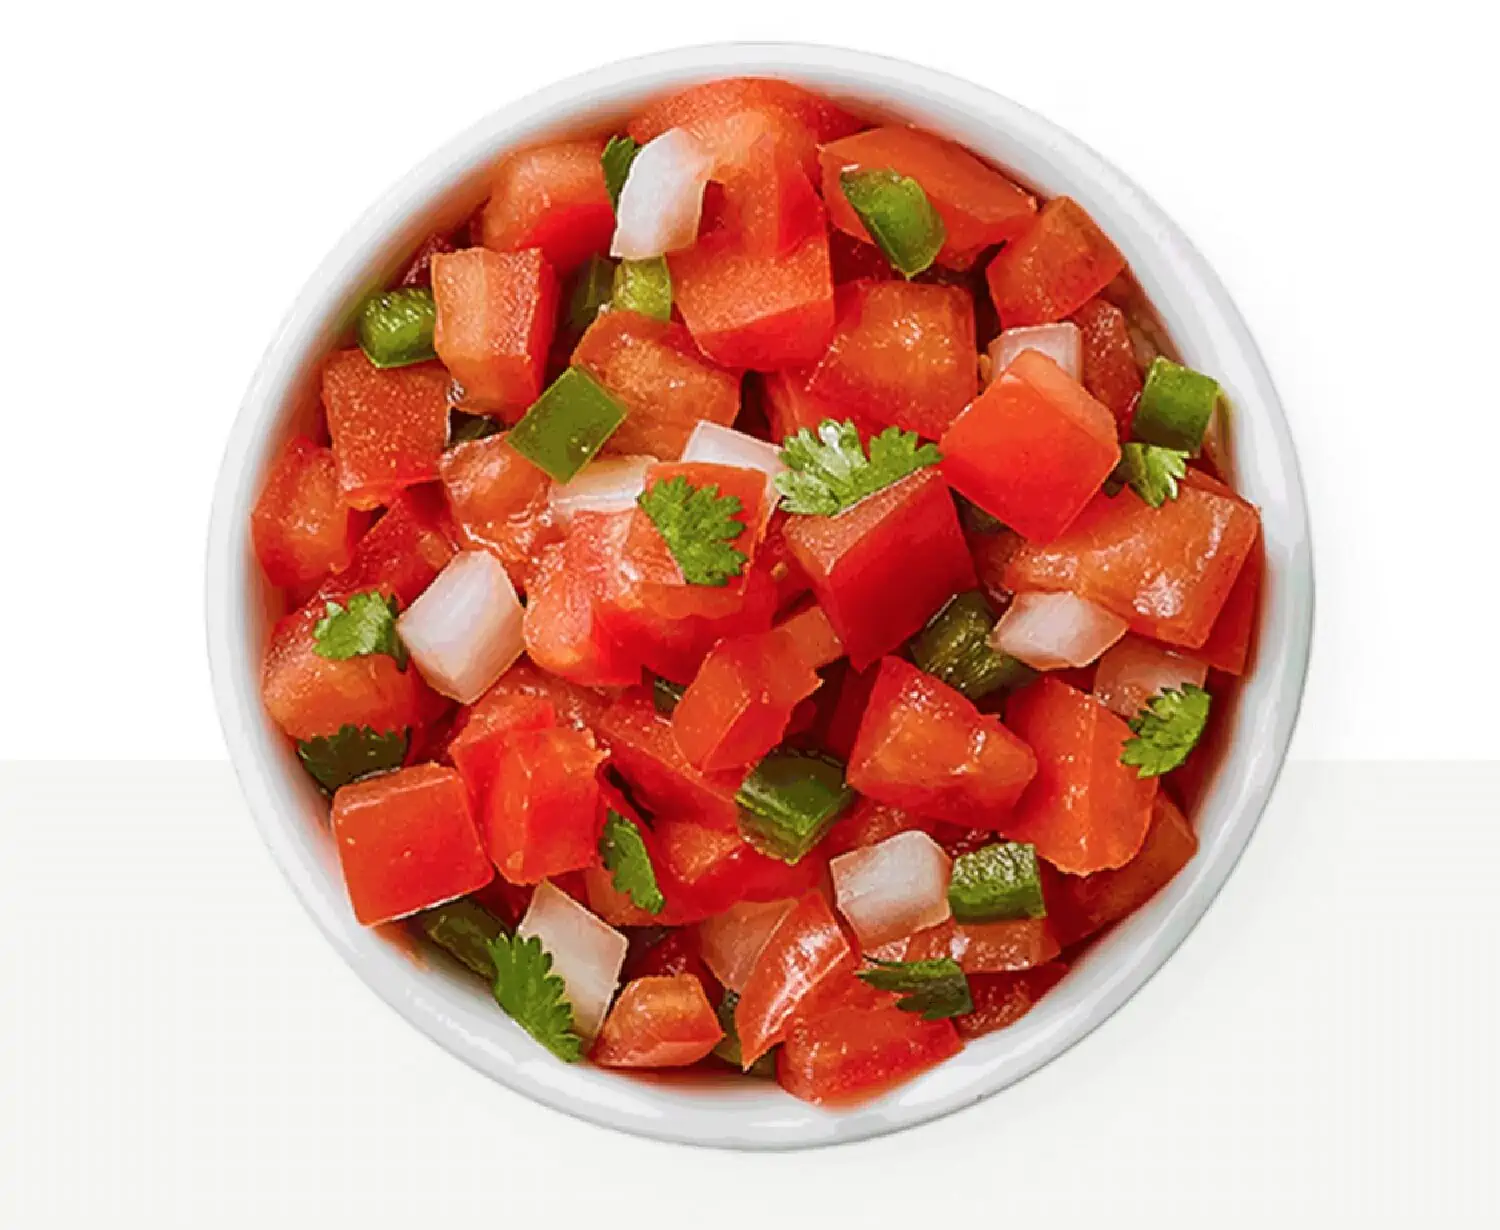 A small white bowl filled with diced tomatoes, jalapenos, white onion, and cilantro on a white and off white background.